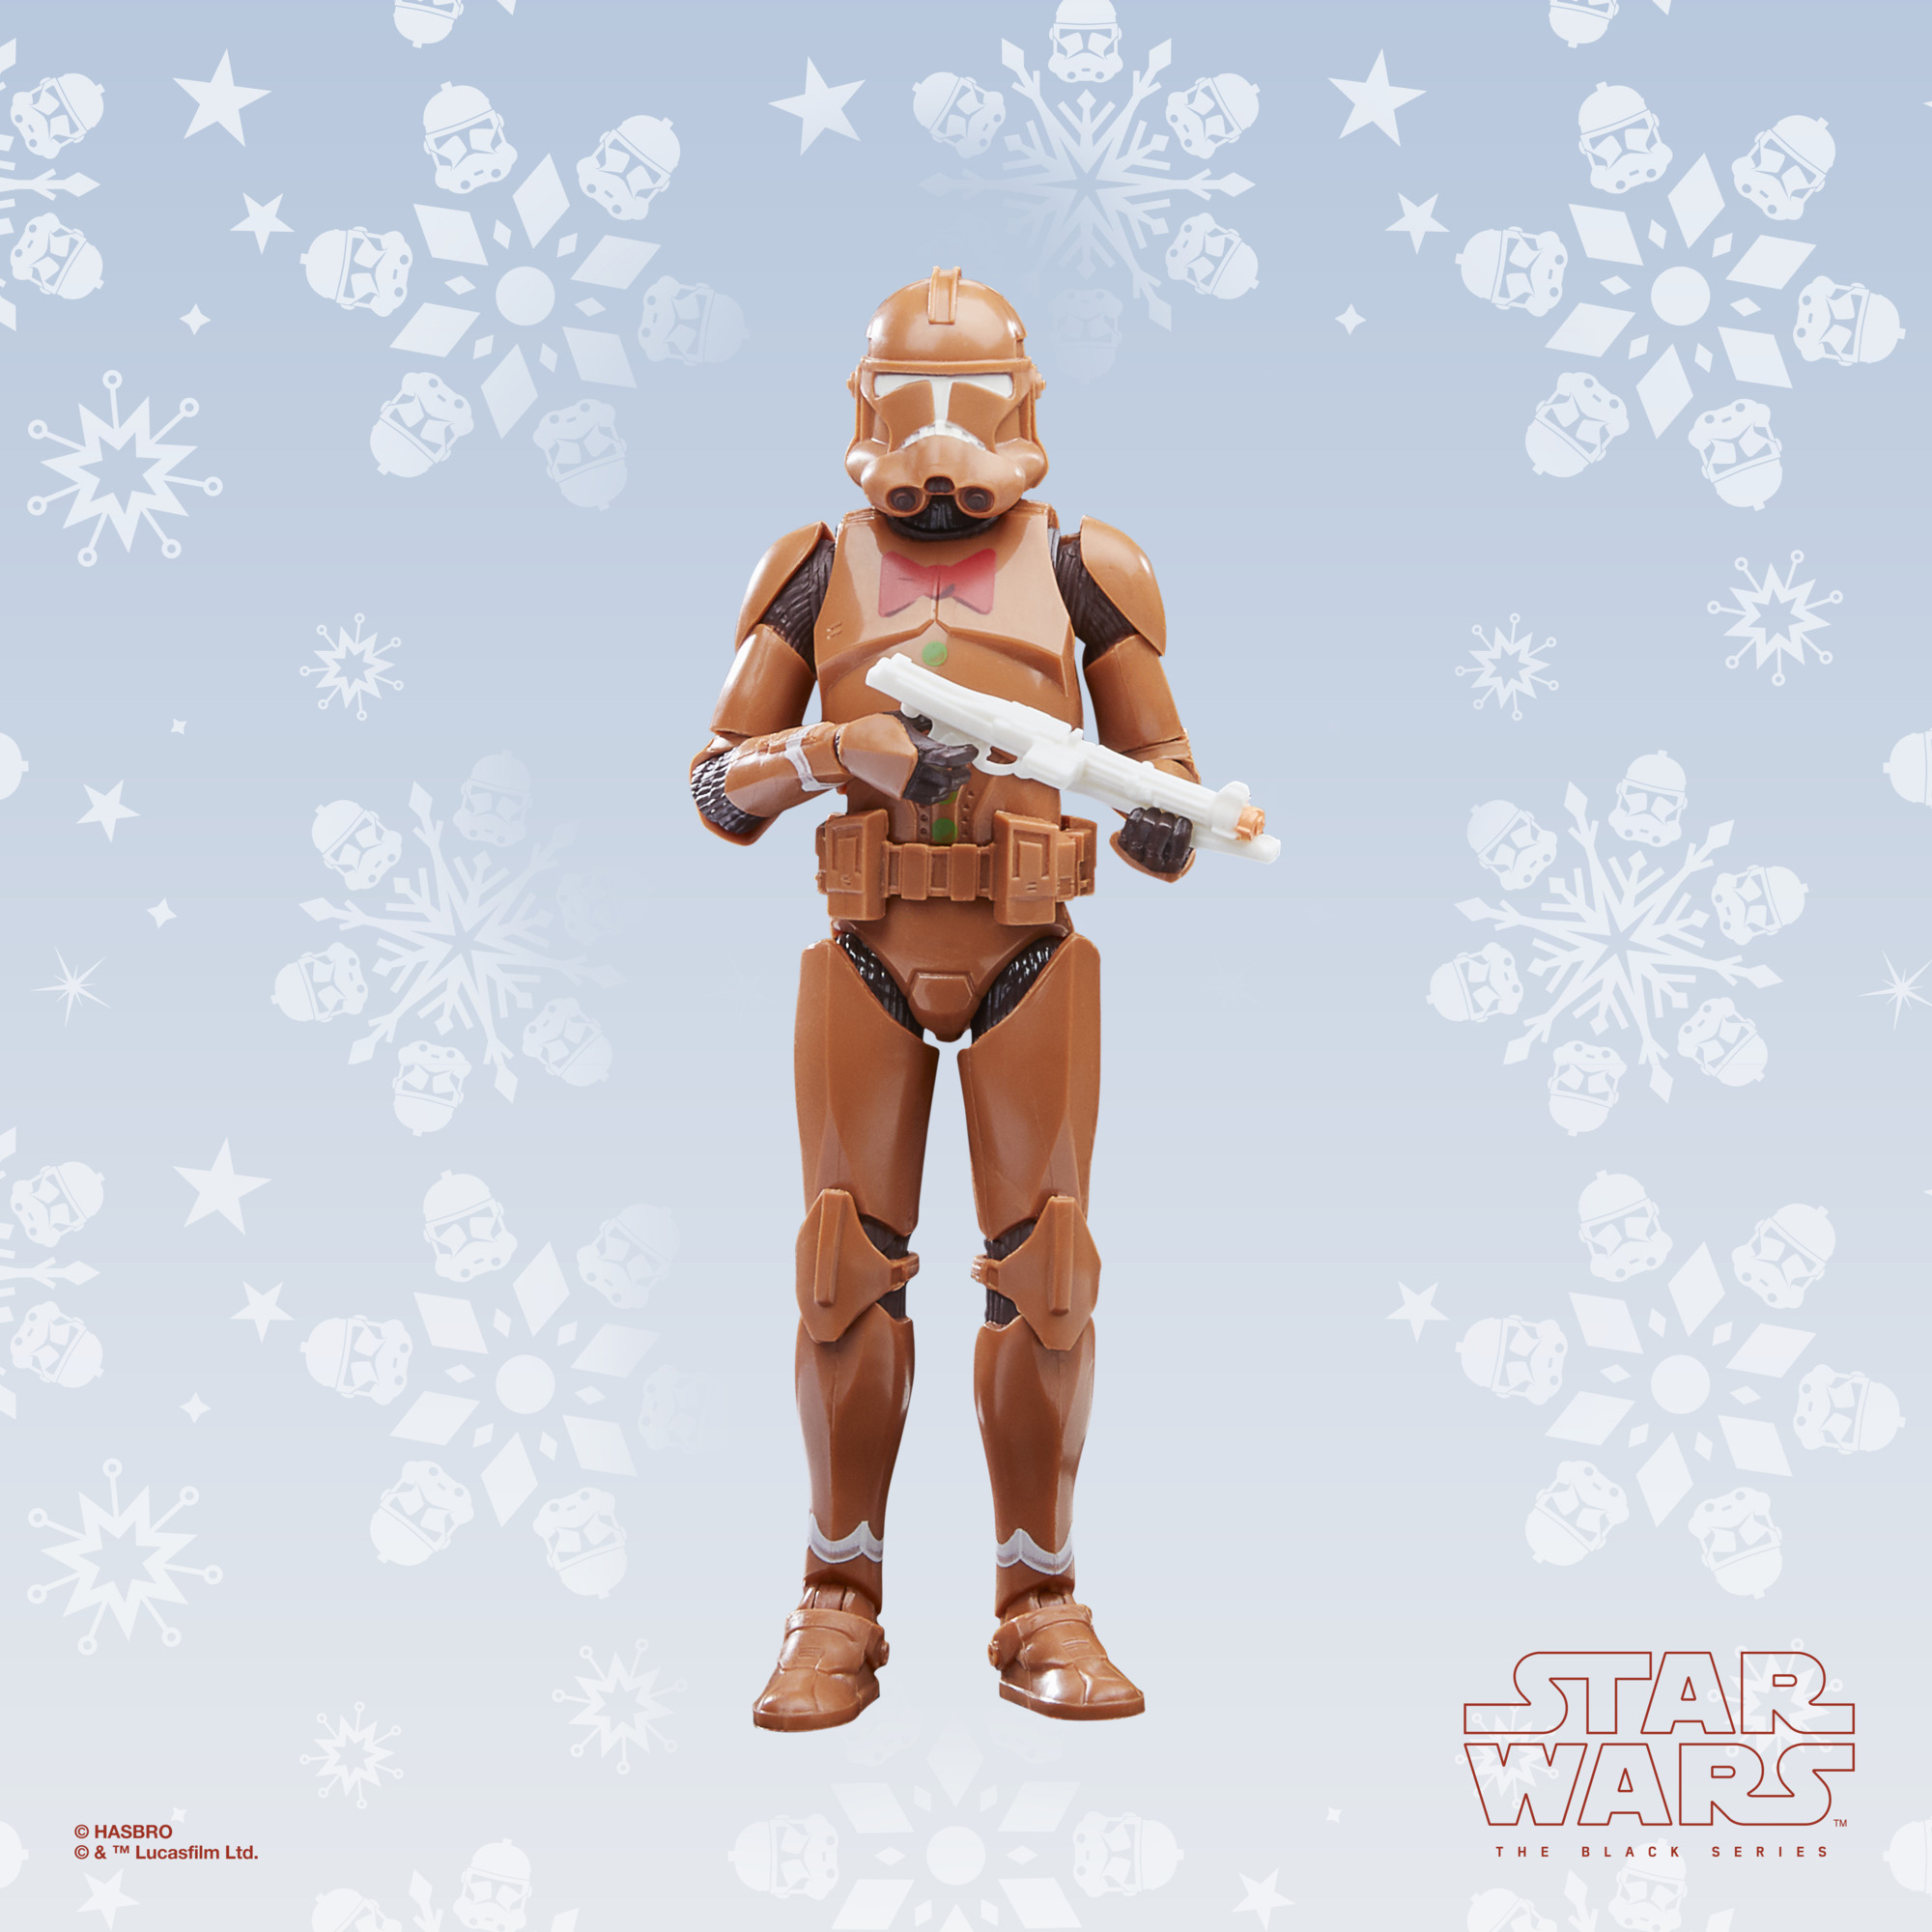 Press Release - 6 New 2022 The Black Series 6-Inch Holiday Edition Figures